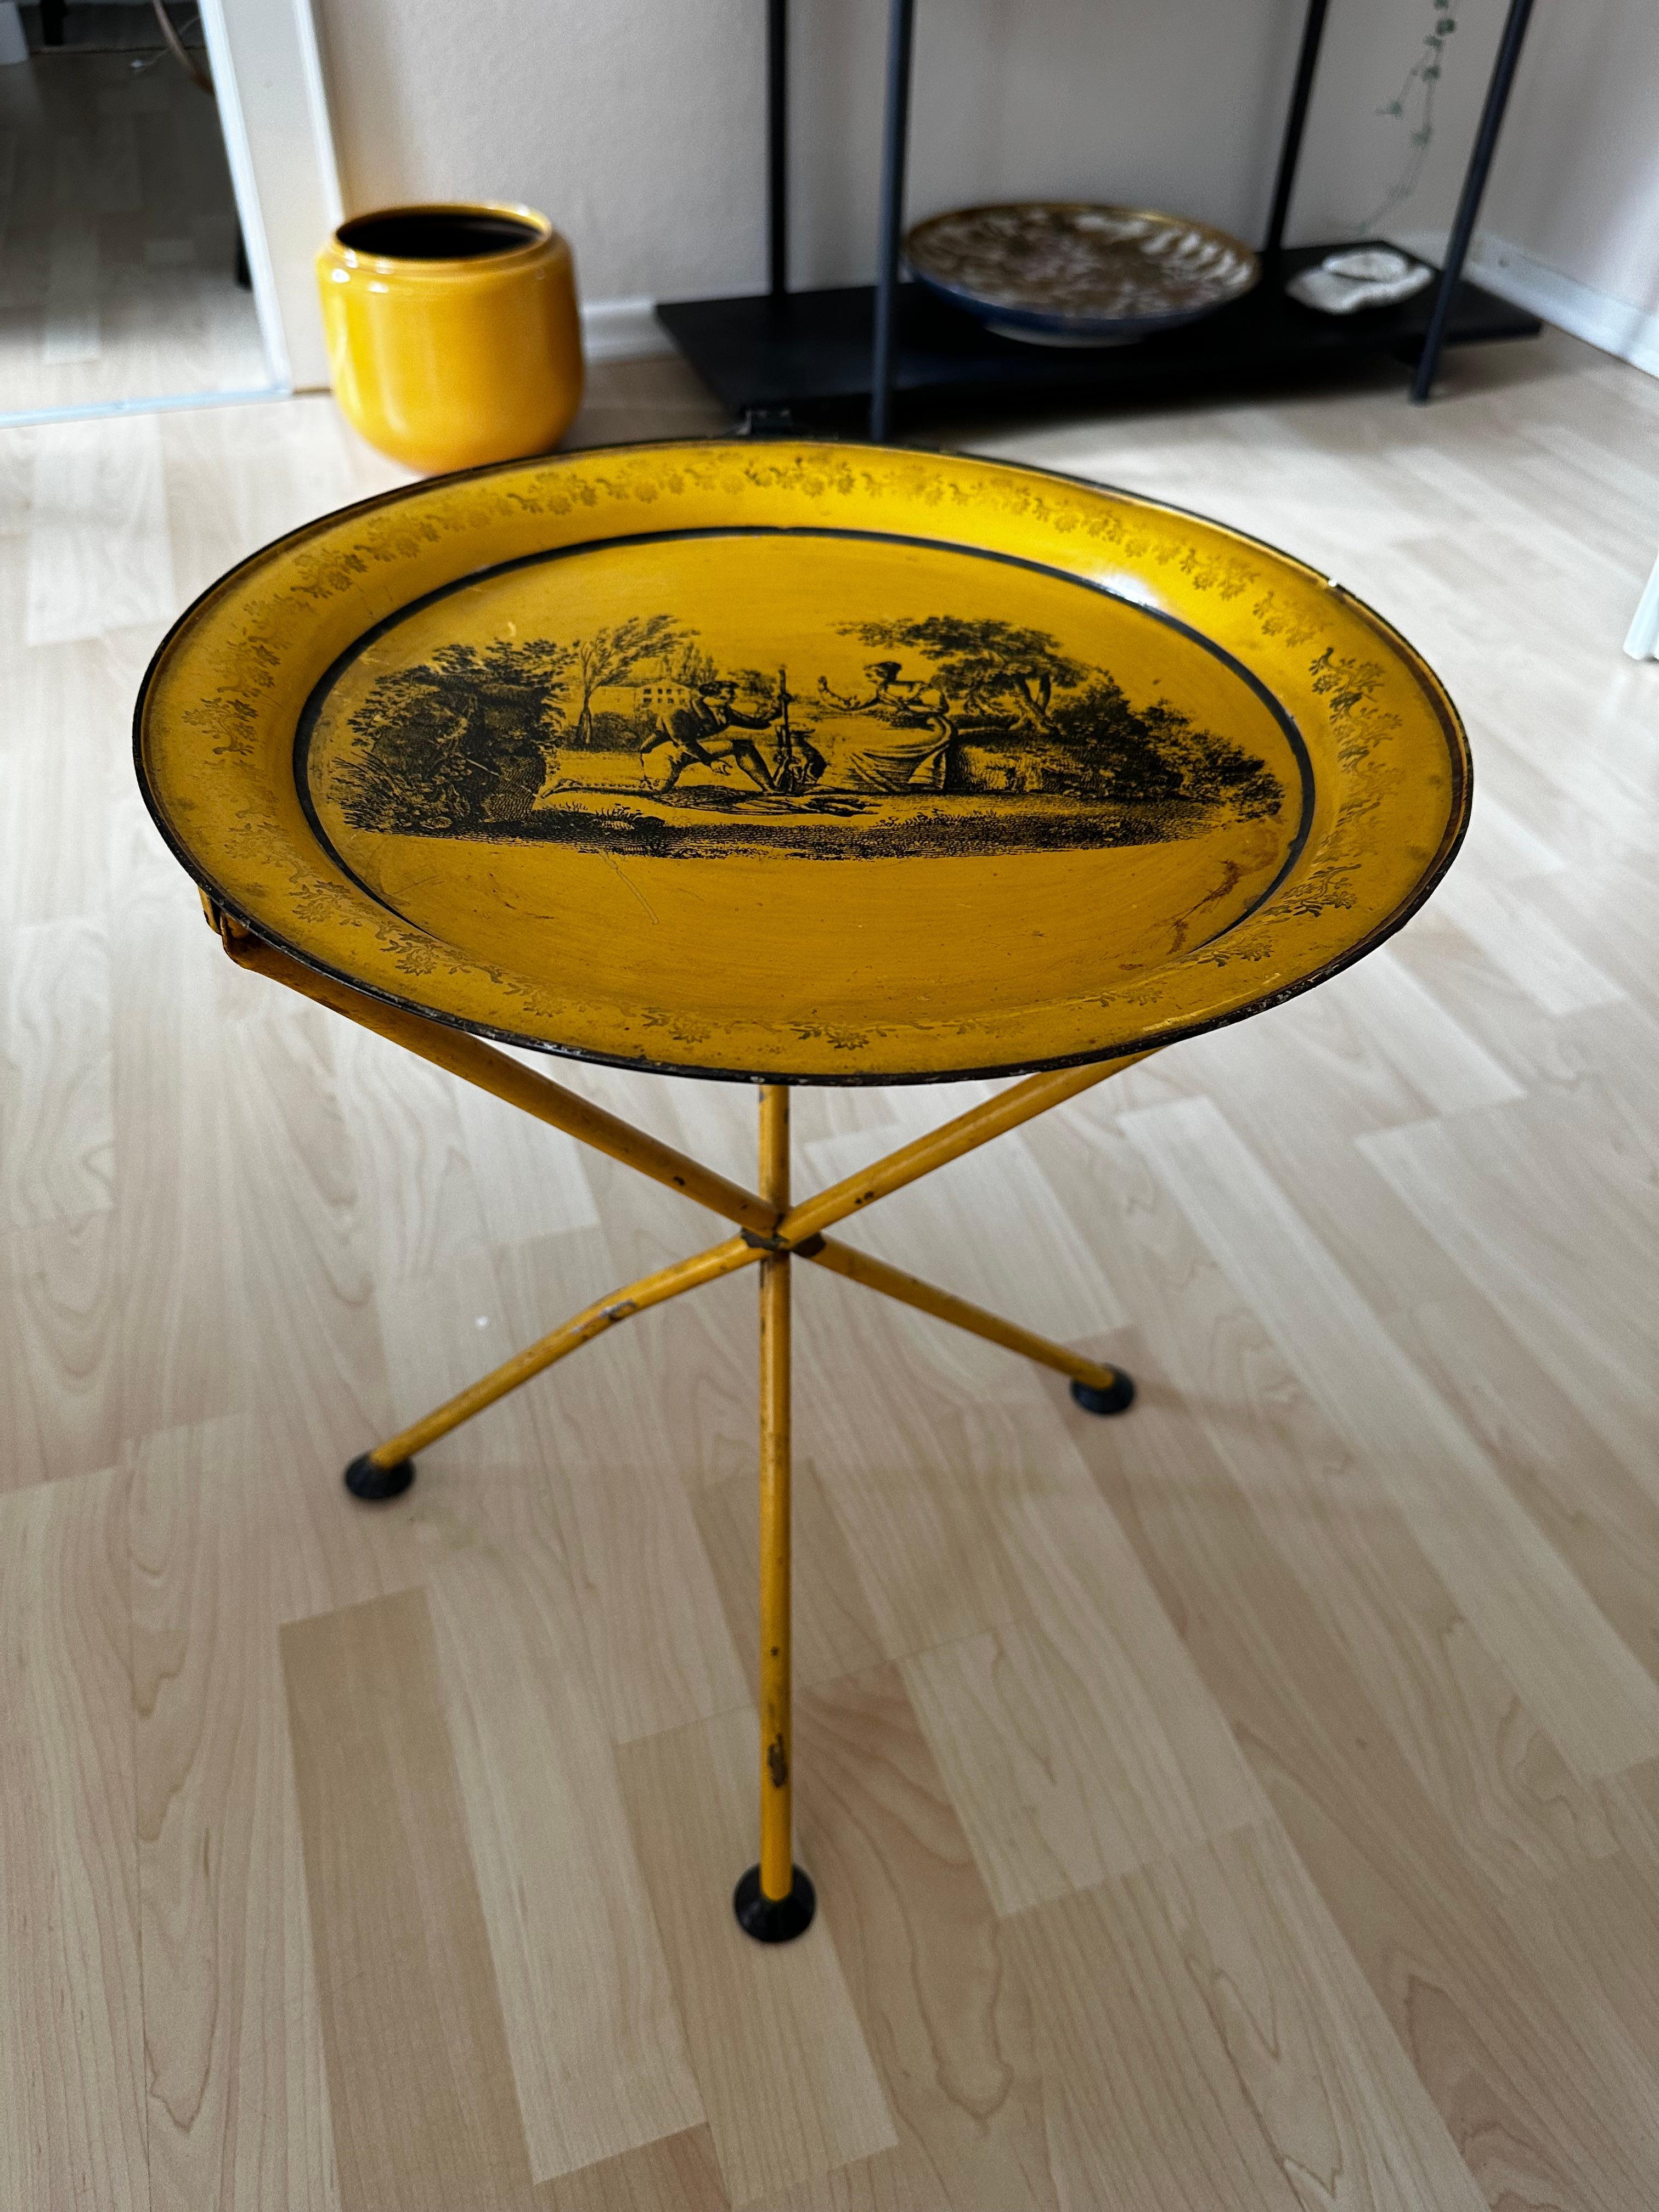 Transport your living space back to the opulent Empire era with this Italian folding table crafted from metal, dating back to around 1970. The Empire style was known for its extensive use of metalwork, and the intricate paintings on metalware, such